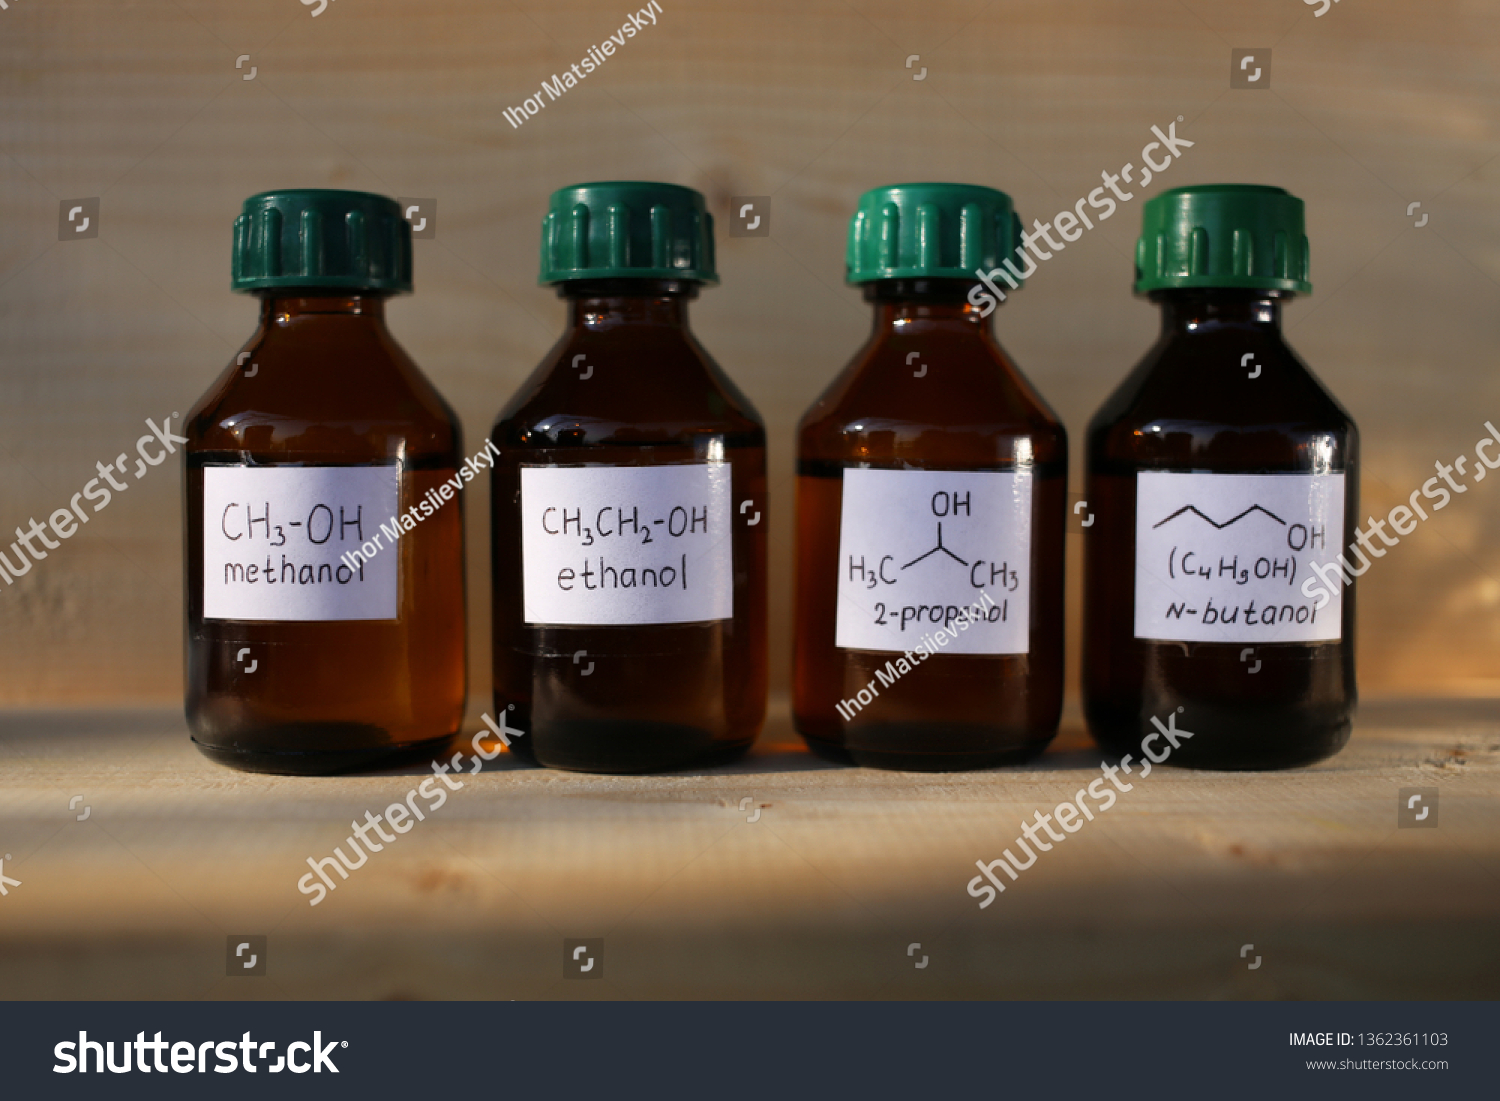 Polar protic solvents alcohols in dark glass bottles: methanol, ethanol, isopropanol, butanol. These substances are used as fuel additives to increase the octane number. #1362361103